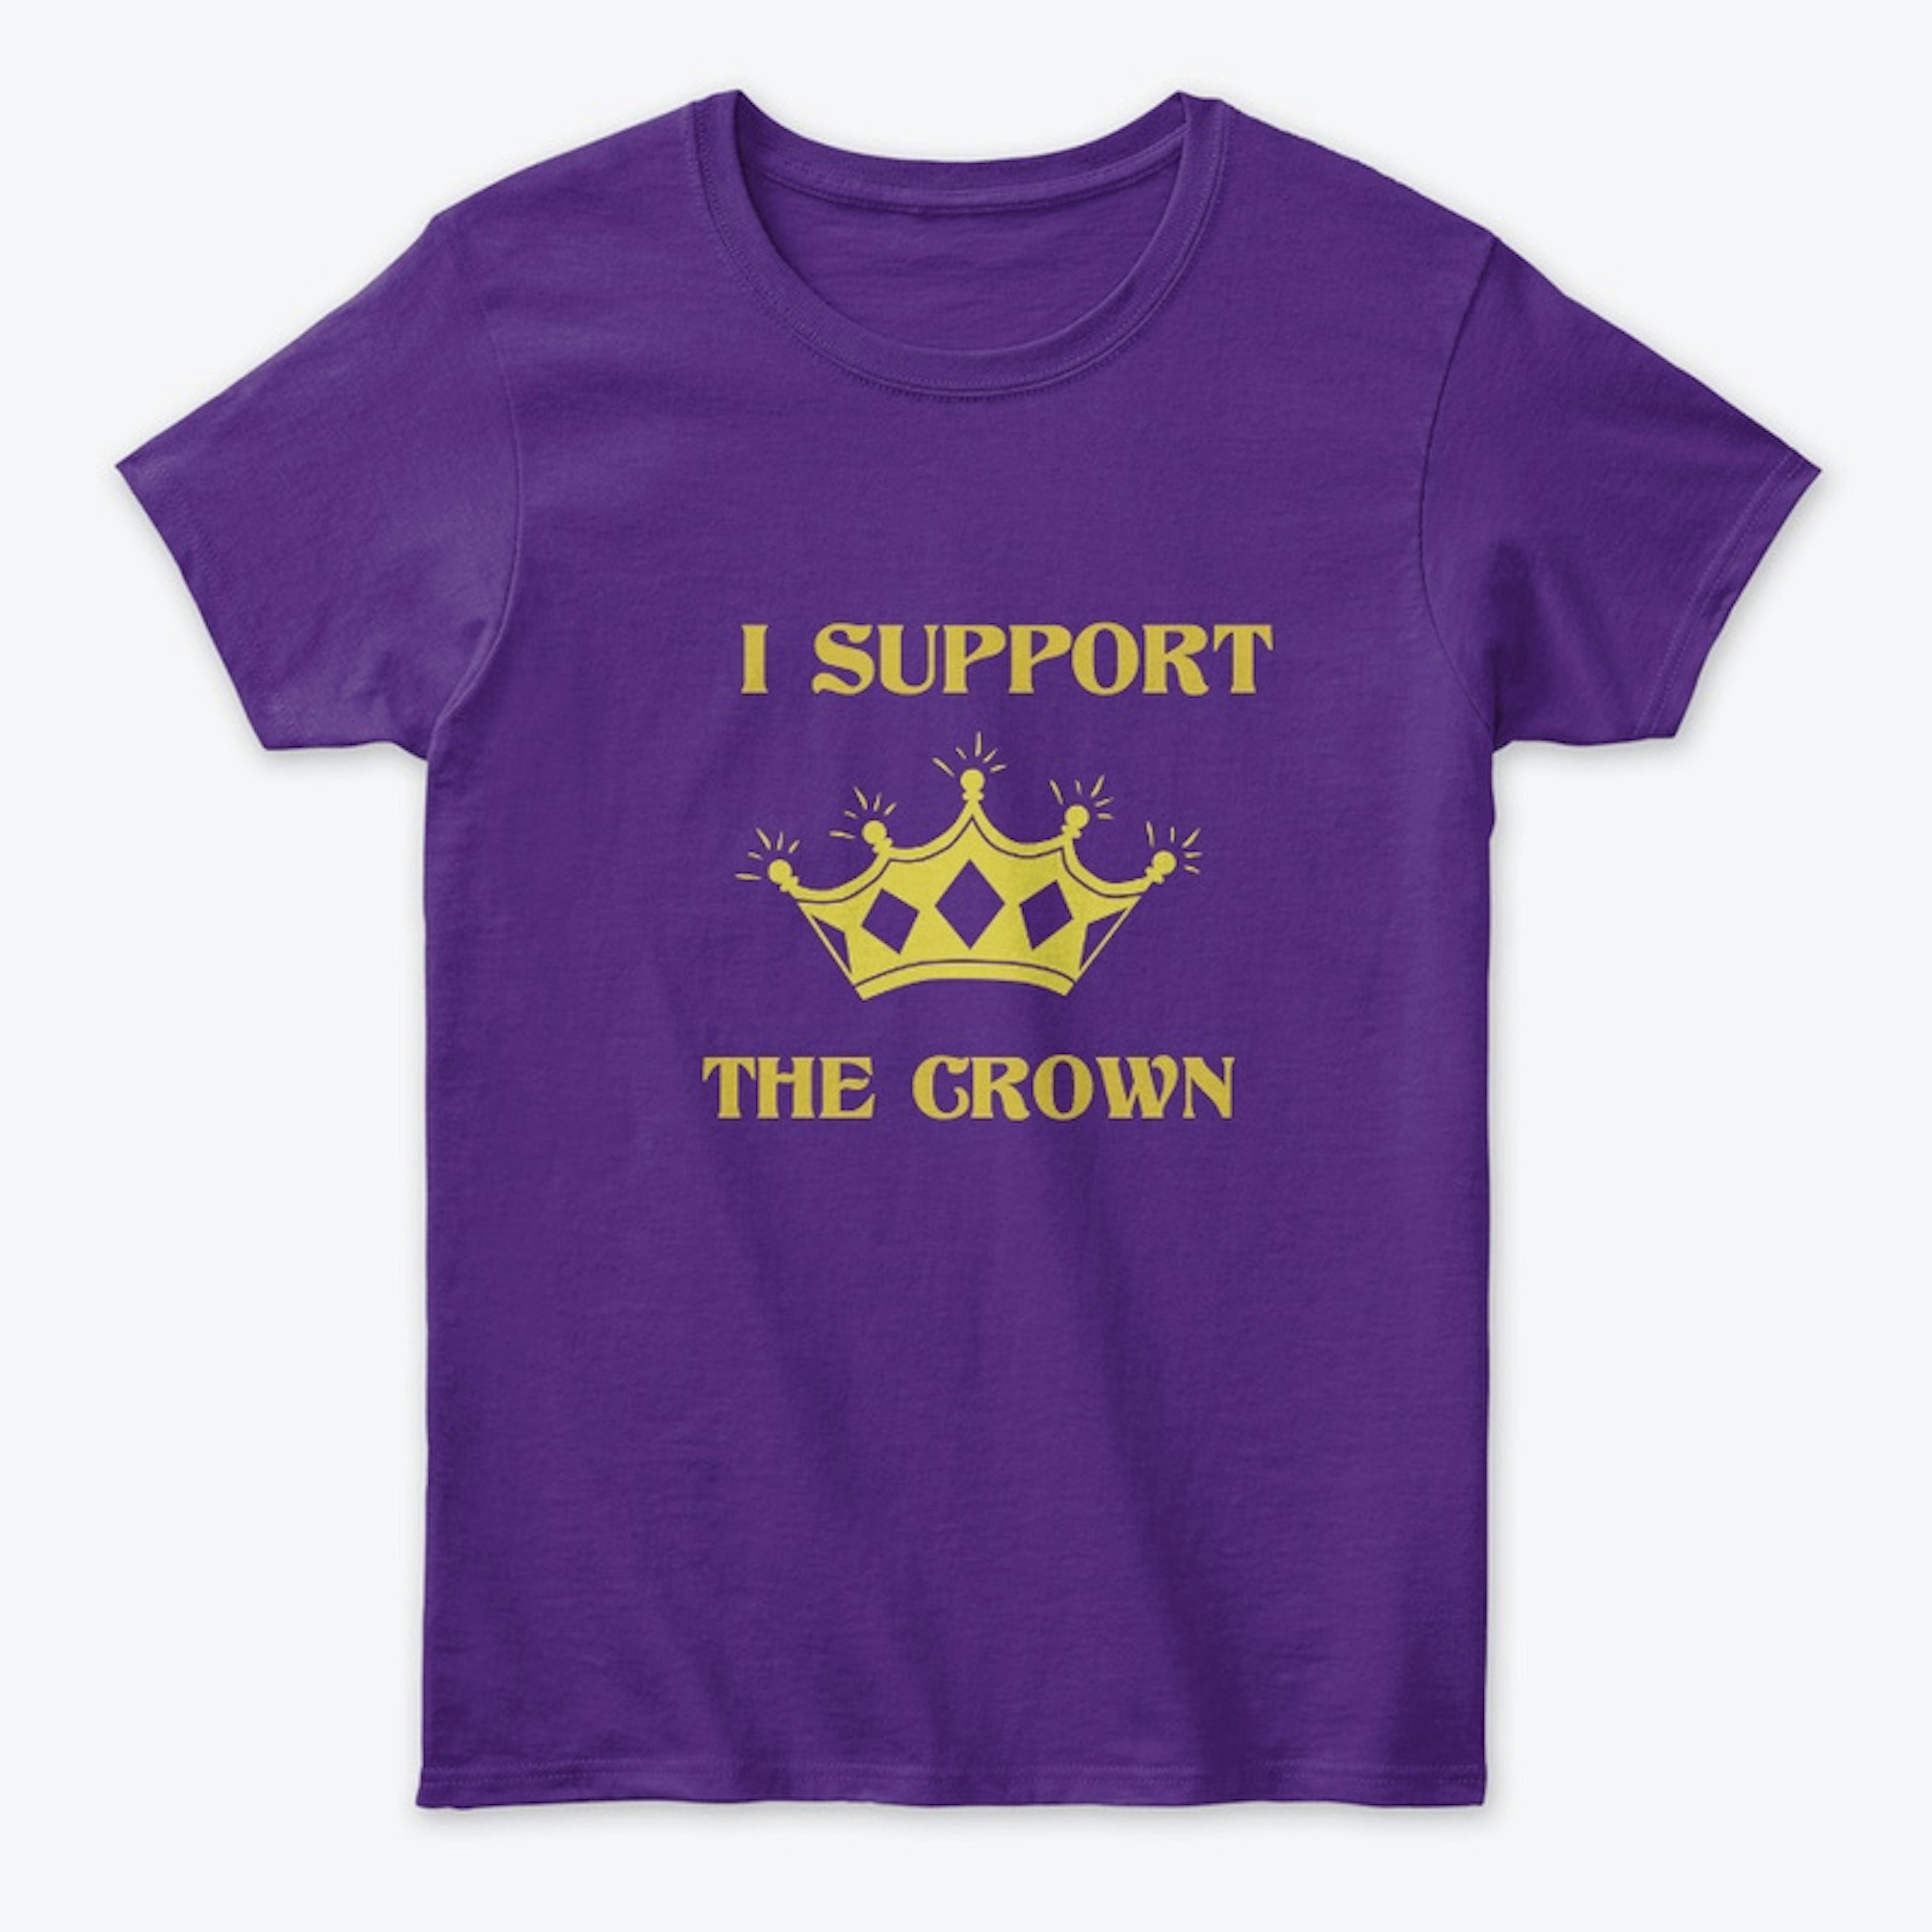 I Support The Crown Tee g